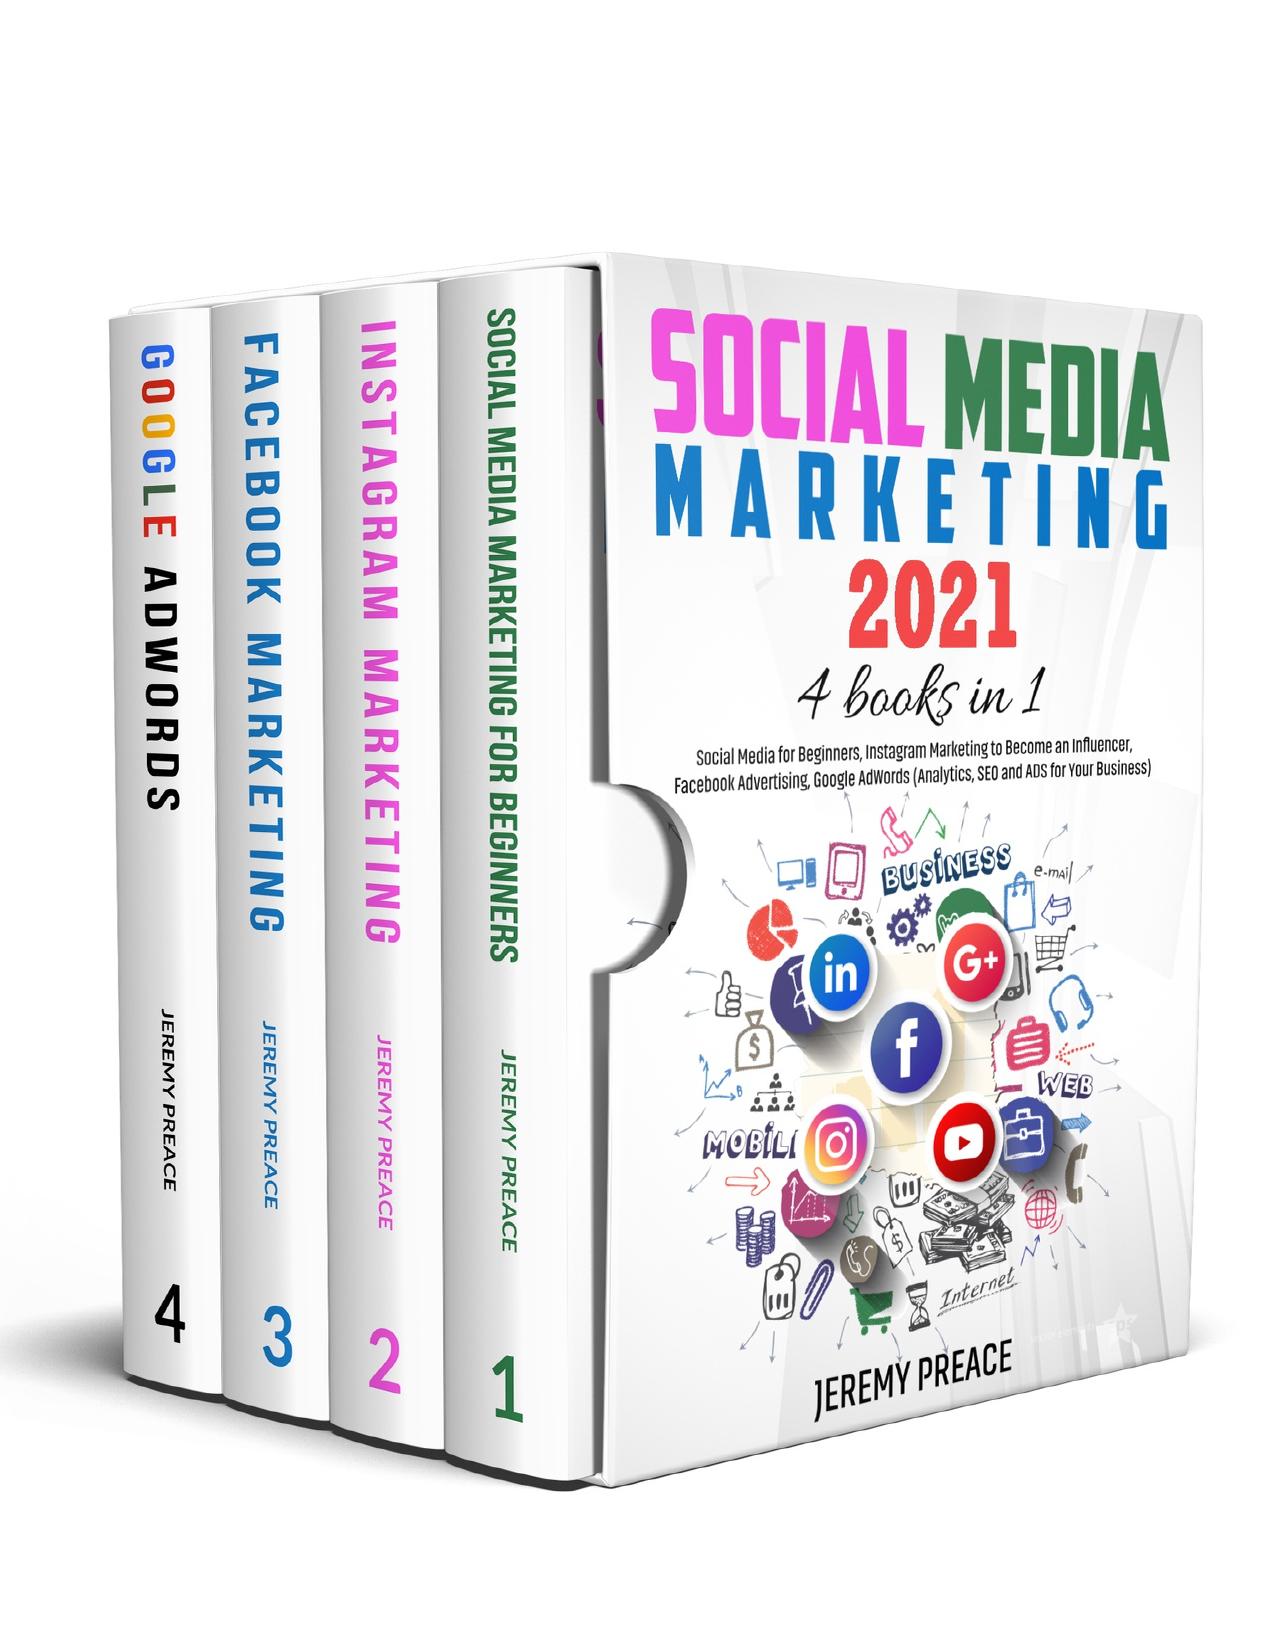 Social Media Marketing 2021: 4 Books in 1 - Social Media for Beginners, Instagram Marketing to Become an Influencer, Facebook Advertising, Google AdWords (Analytics, SEO and ADS for Your Business)